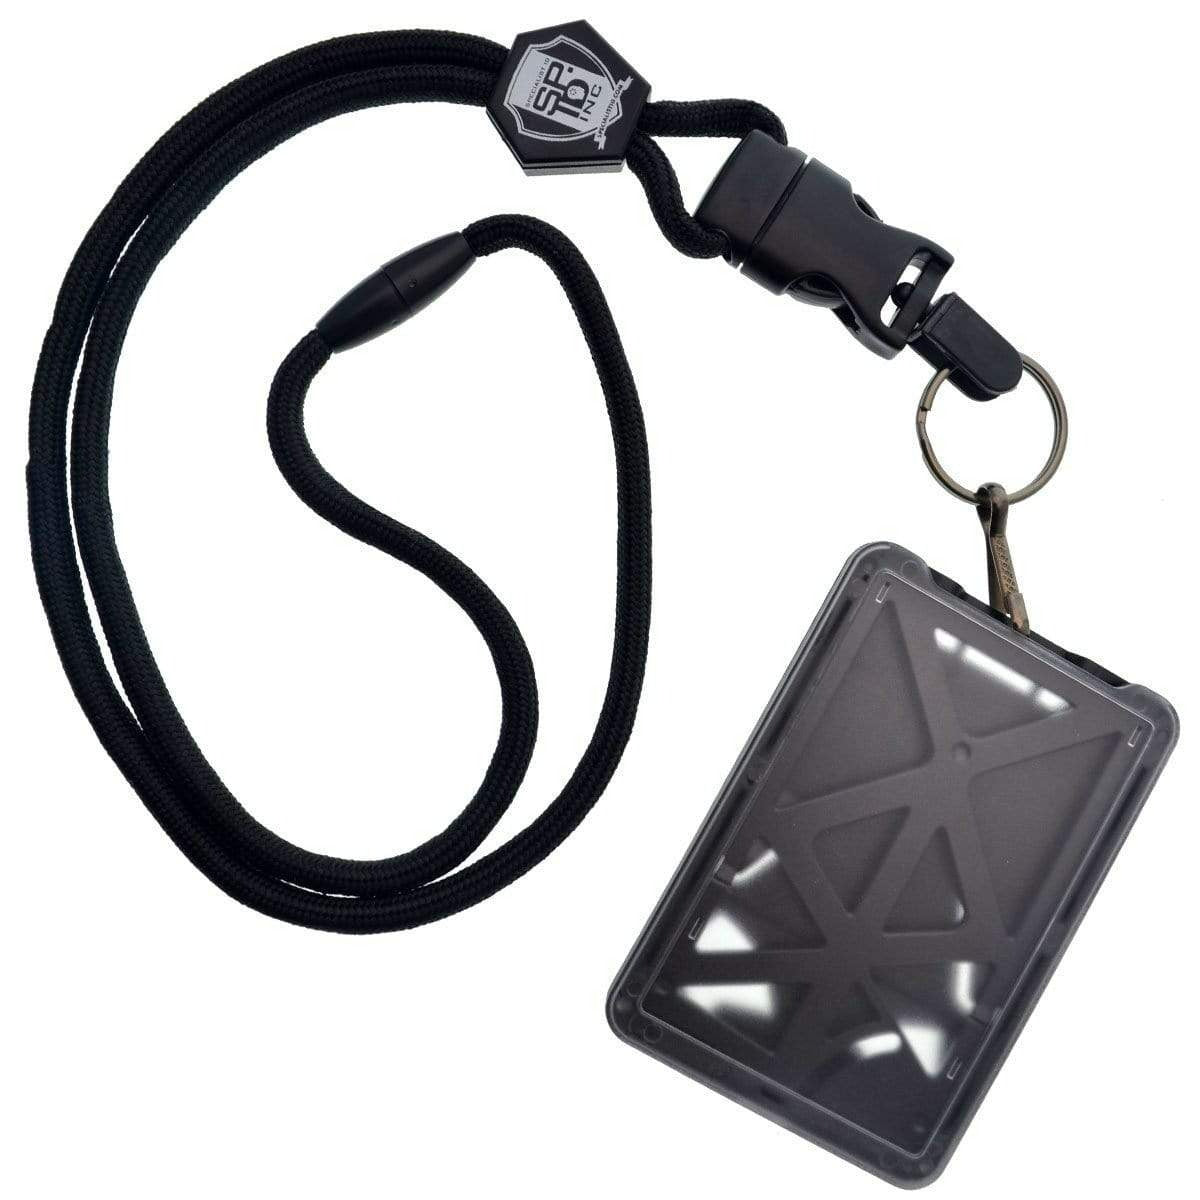 Specialist ID 2 Pack - Premium Event Badge Holder 4x3 with India